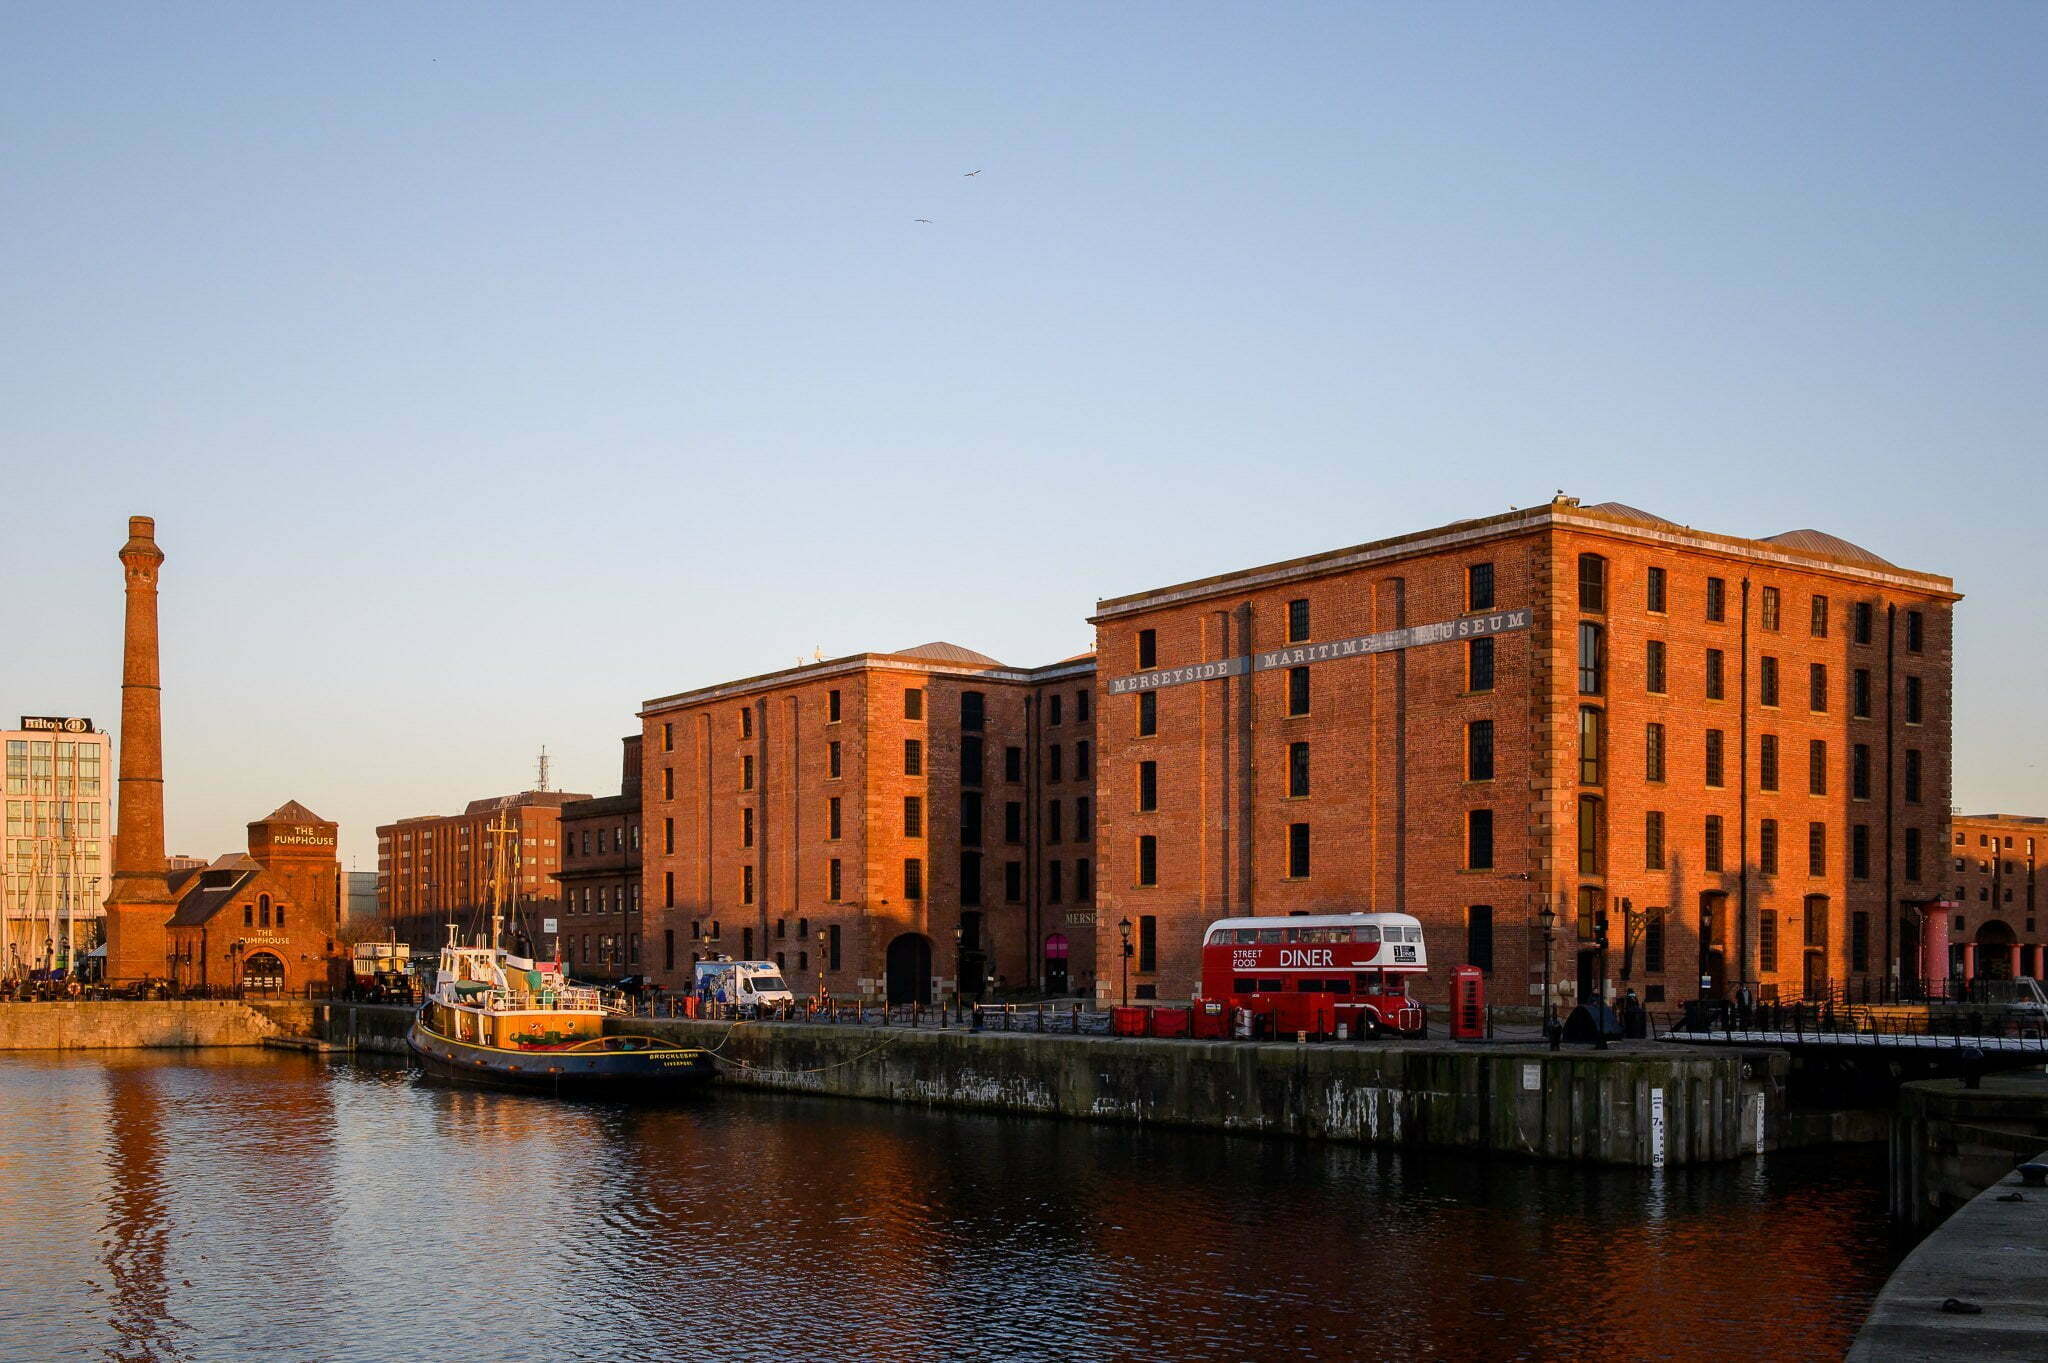 As the sun sets the red brick Maritime Museum glows orange against a blue sky. The dock water is calm.